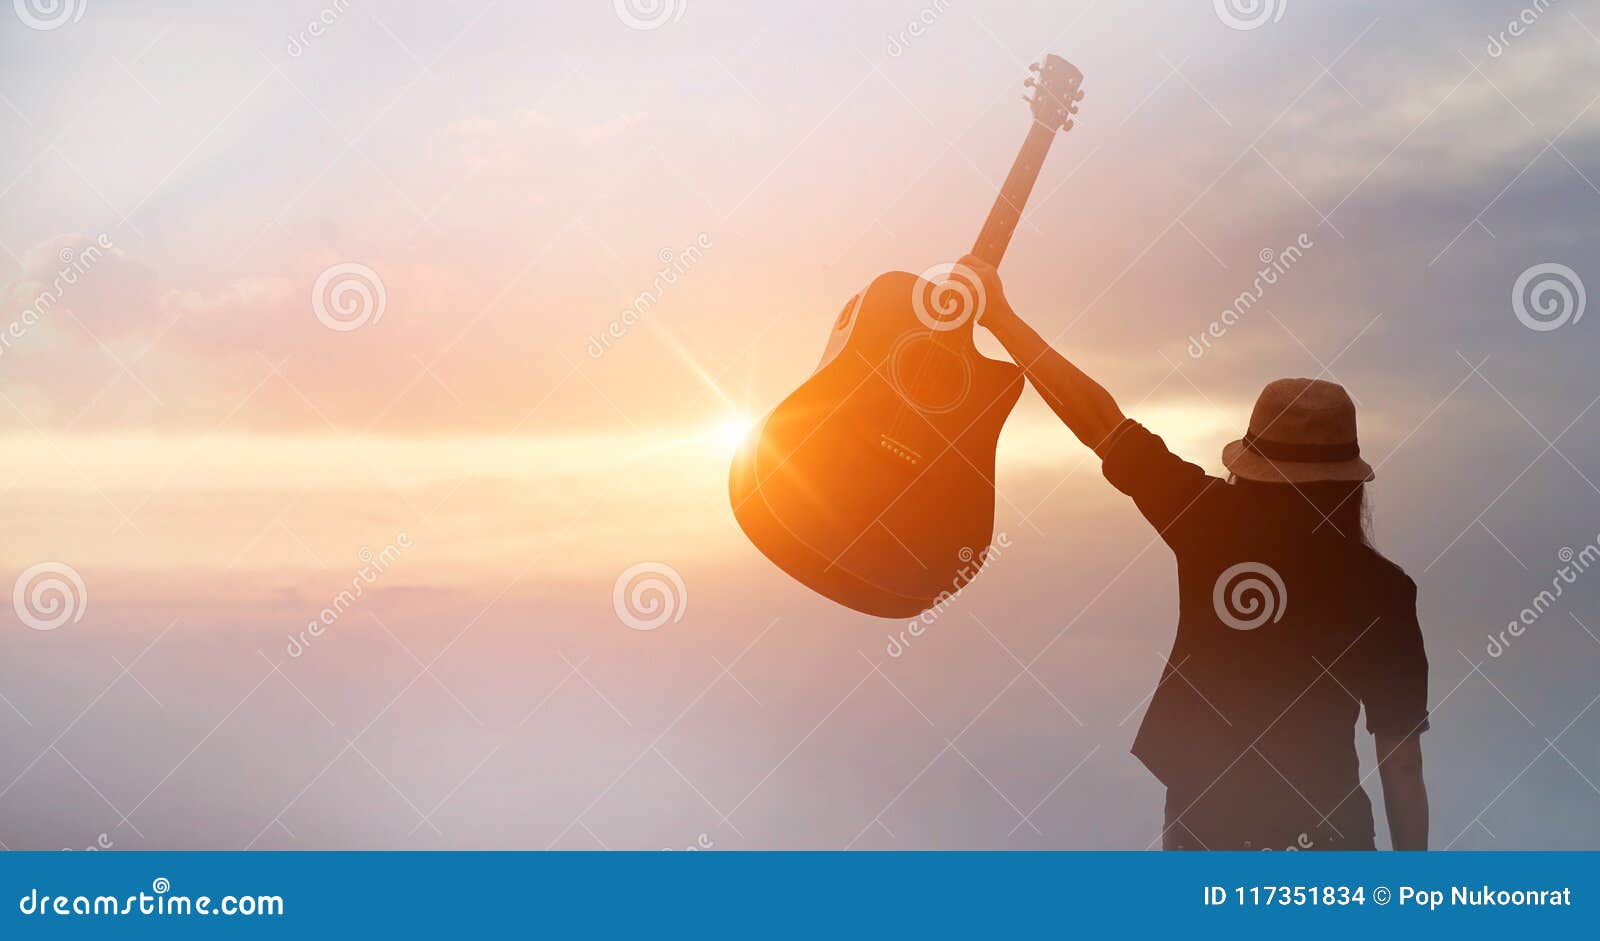 musician holding acoustic guitar in hand of silhouette on sunset